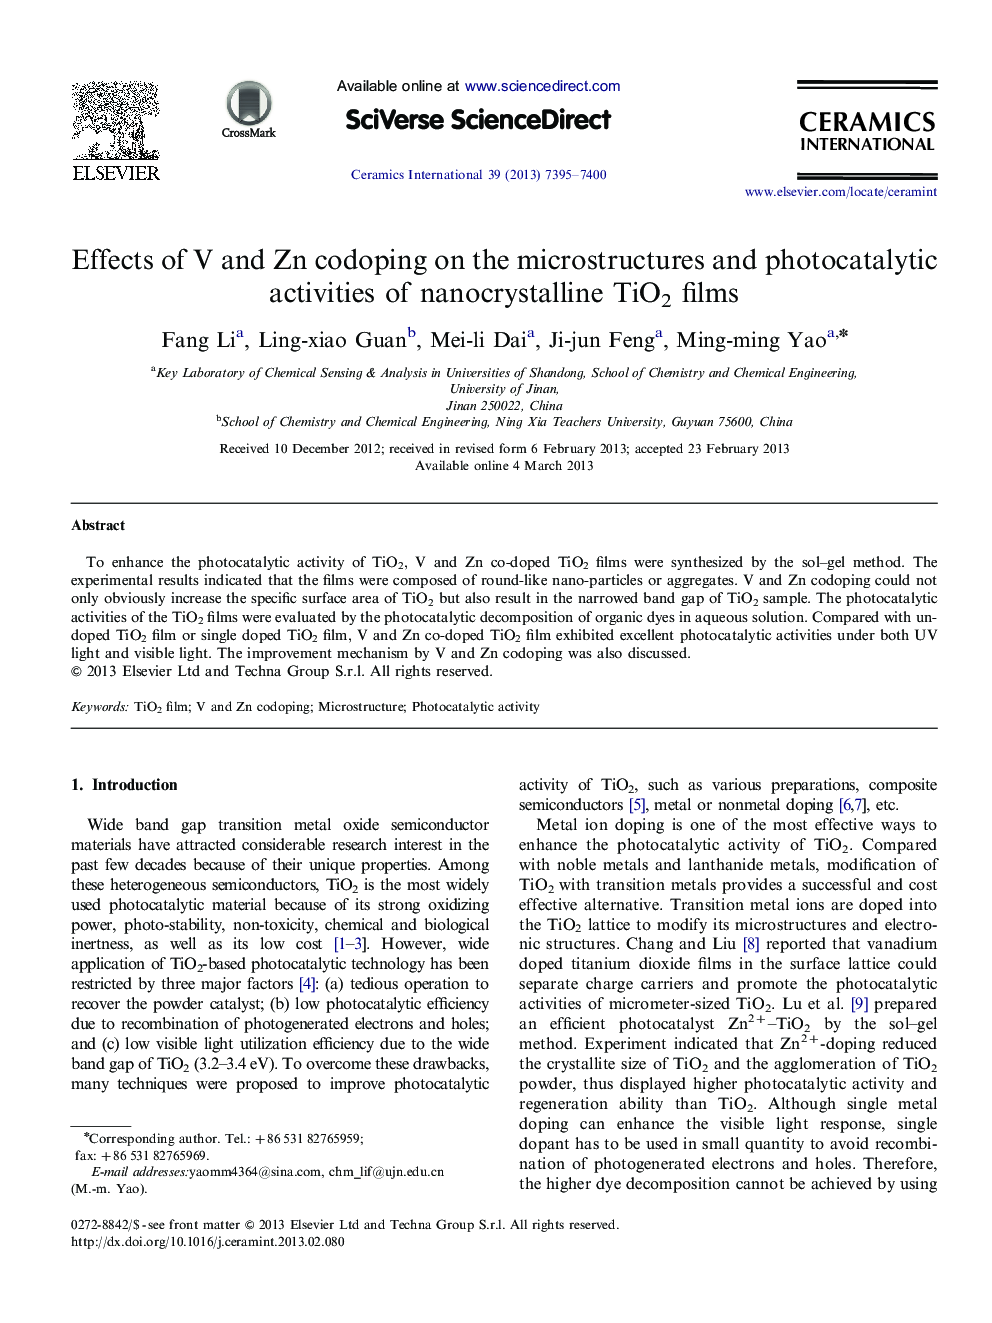 Effects of V and Zn codoping on the microstructures and photocatalytic activities of nanocrystalline TiO2 films